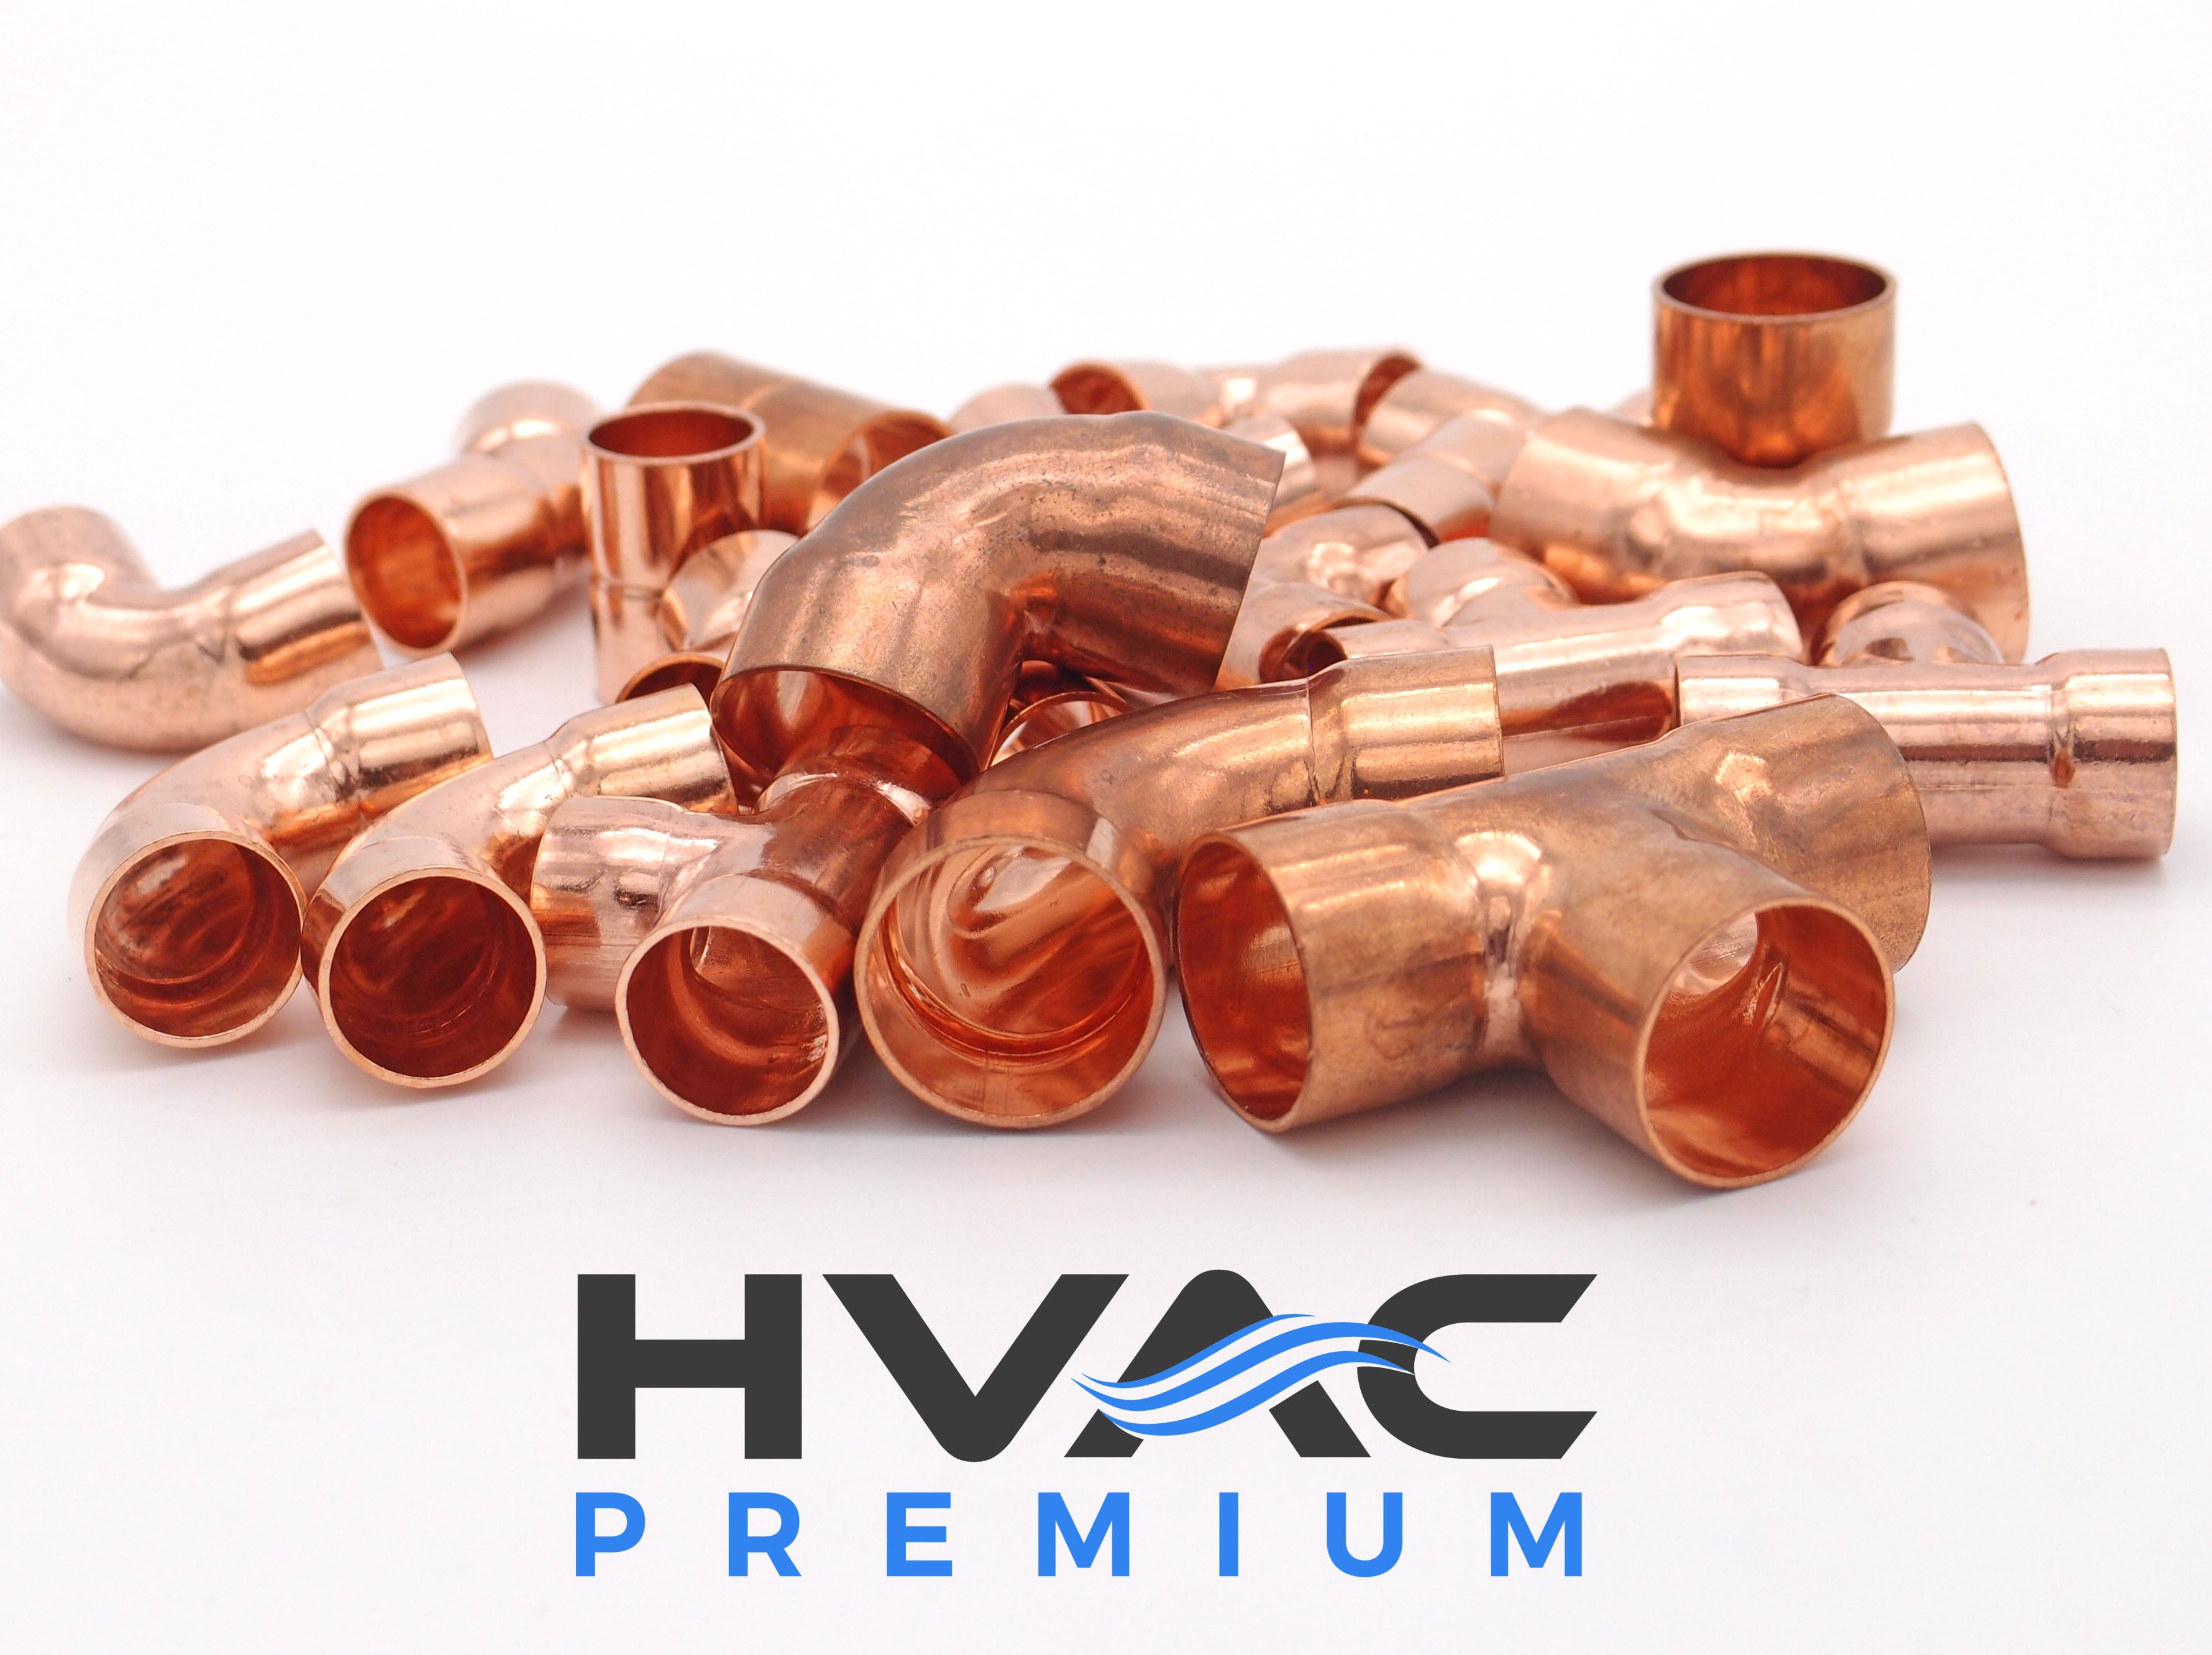 Copper Fitting 1 to 5/8 (HVAC Dimensions) Reducer / Increaser Copper Coupling & HVAC – 7/8 to 1/2 (Plumbing Inner Dimensions) 99.9% Pure Copper - 5 Pack